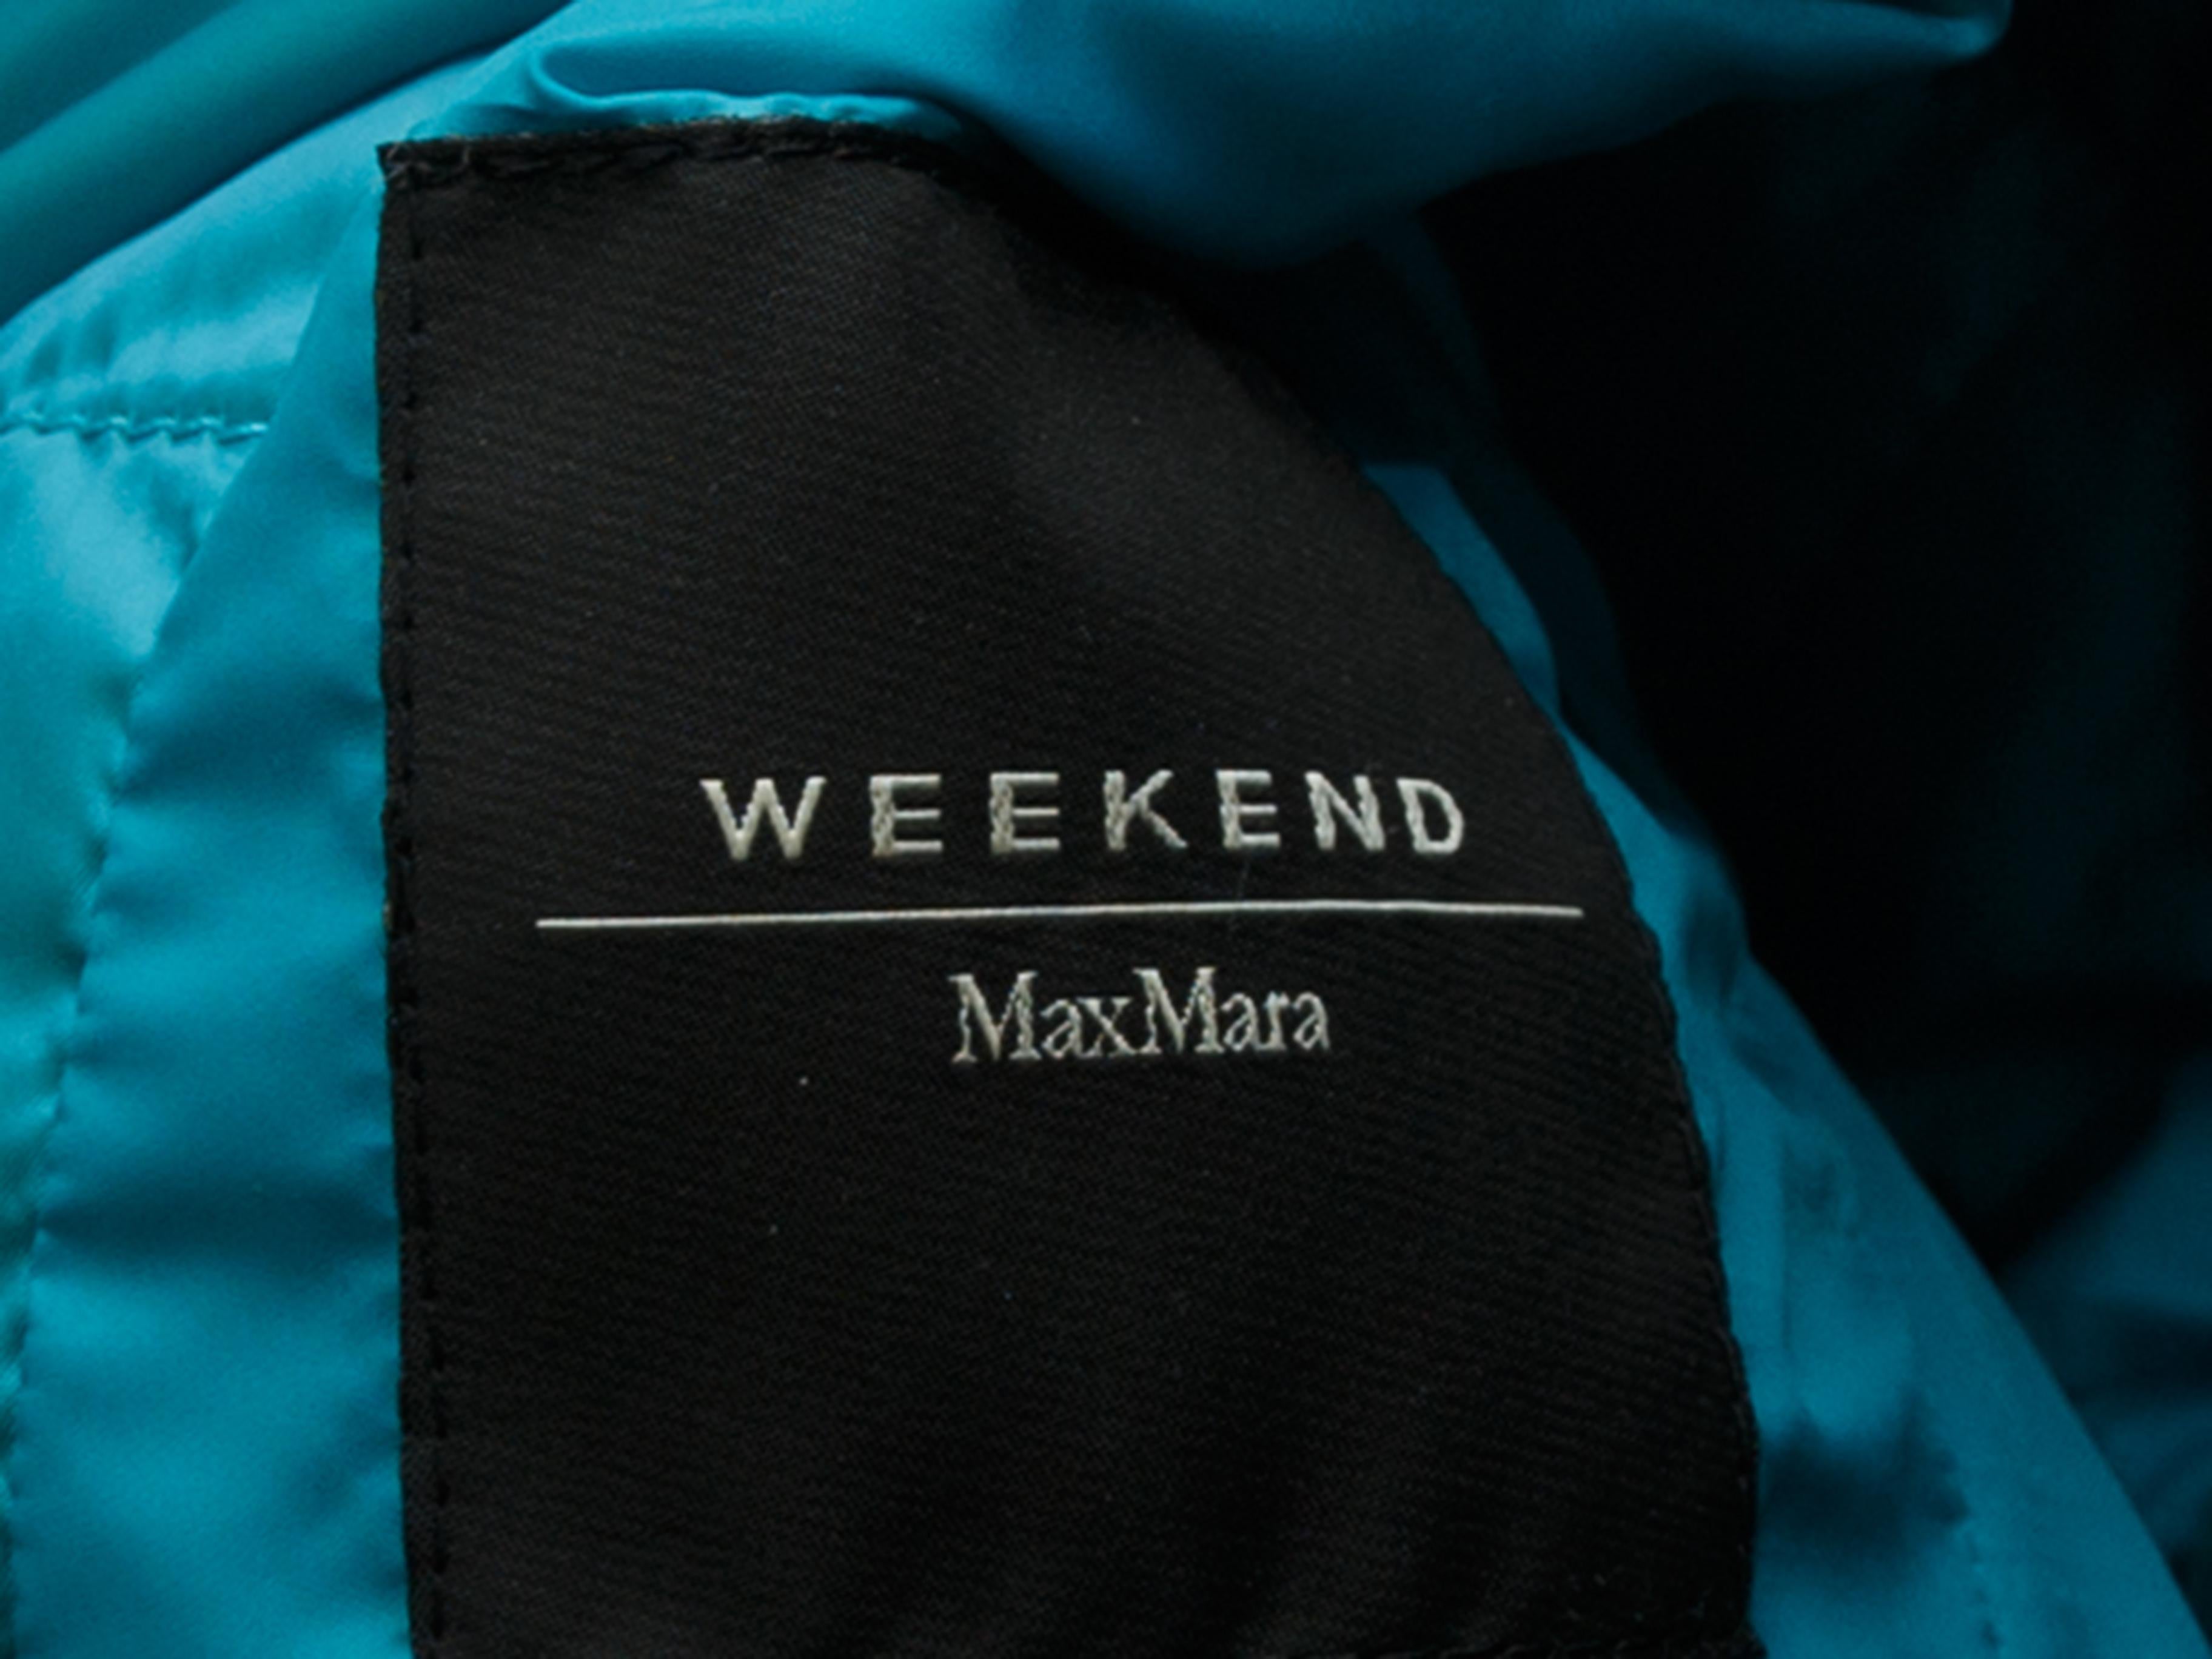 Product details: Teal puffer jacket by Weekend Max Mara. Notch collar. Dual hip pockets. 32